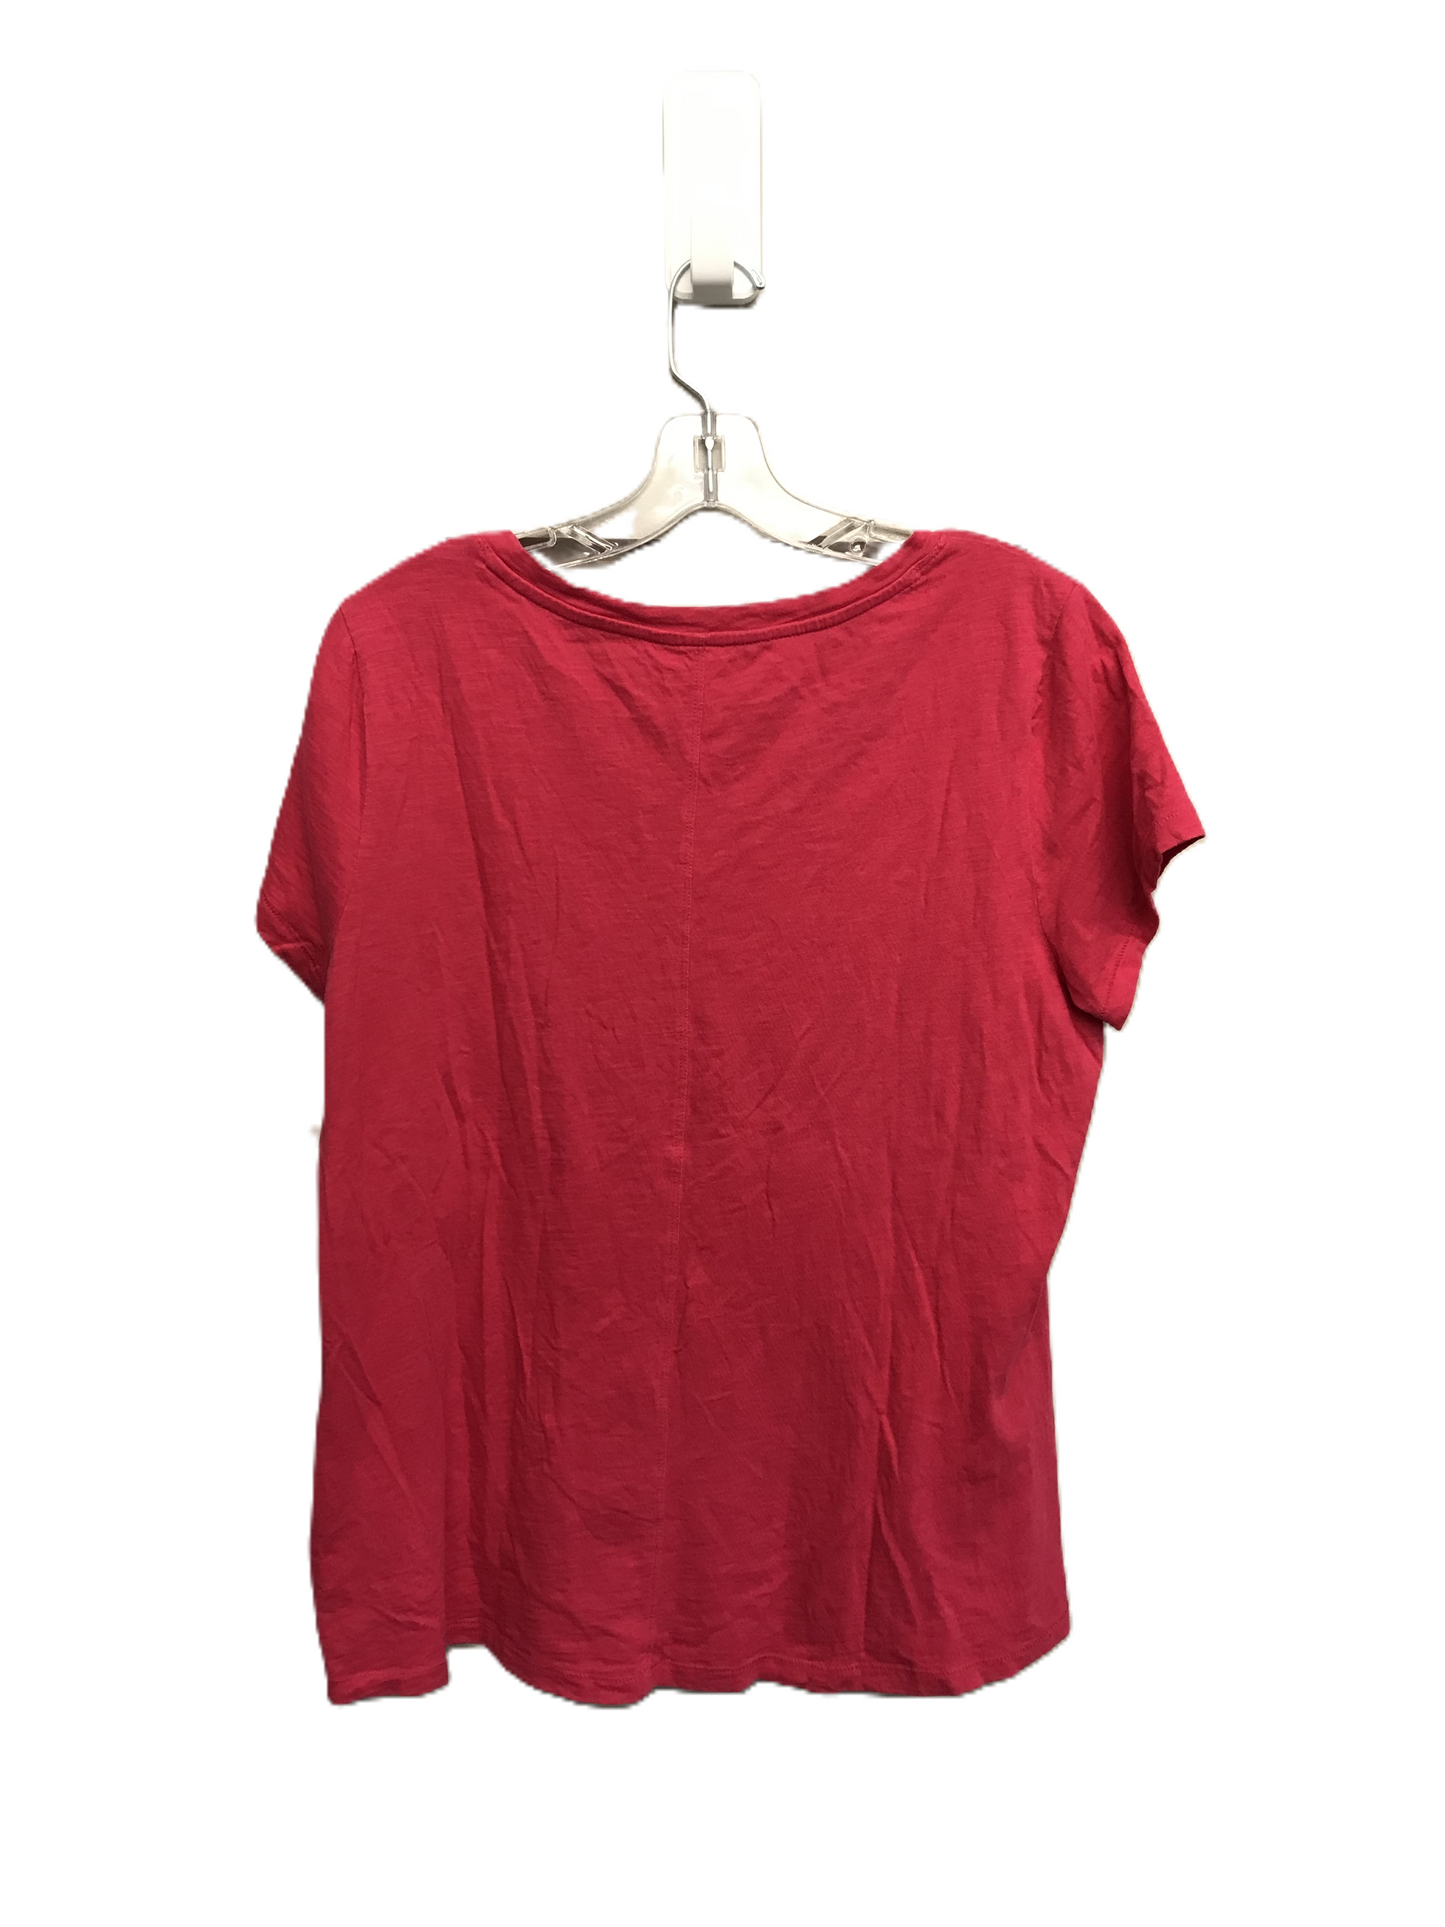 Pink Top Short Sleeve Basic By Sonoma, Size: L